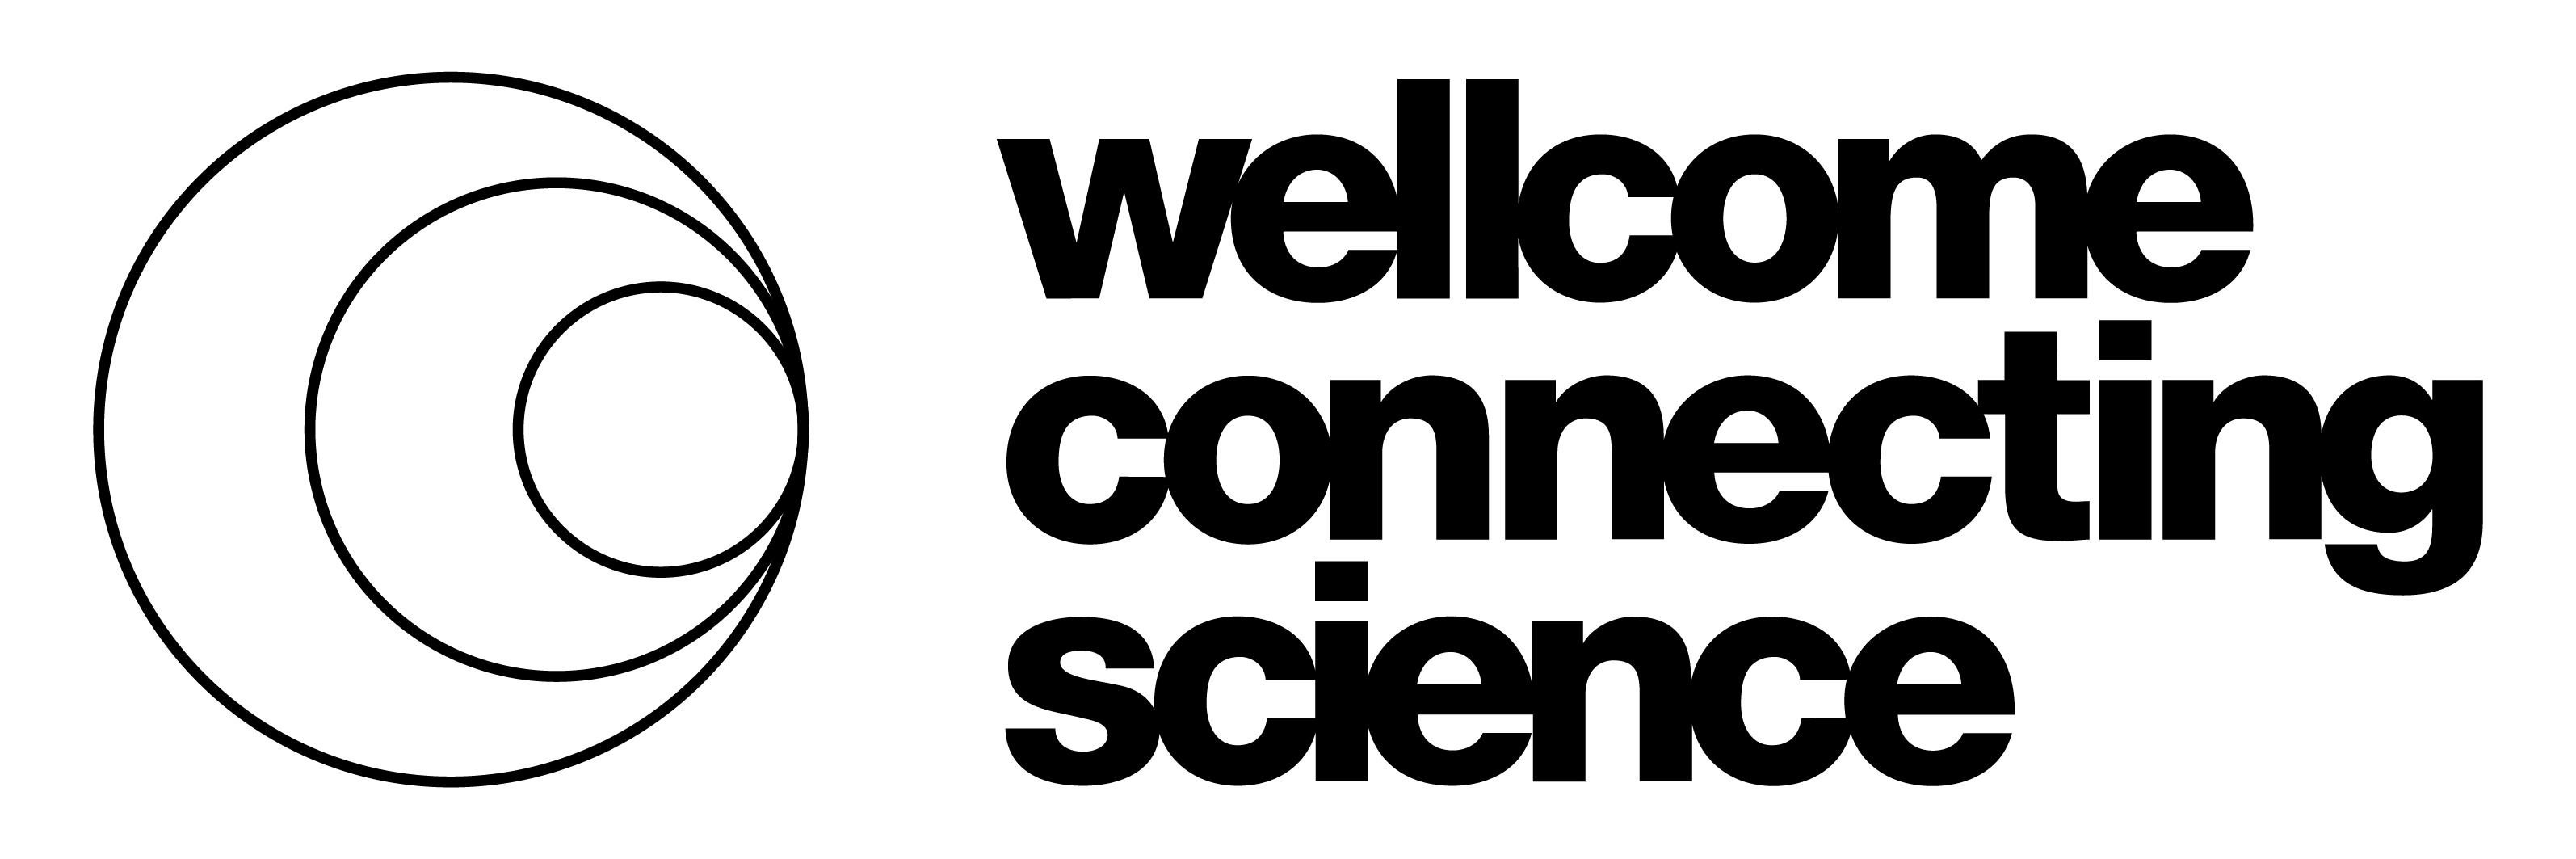 Wellcome 
Connecting Science